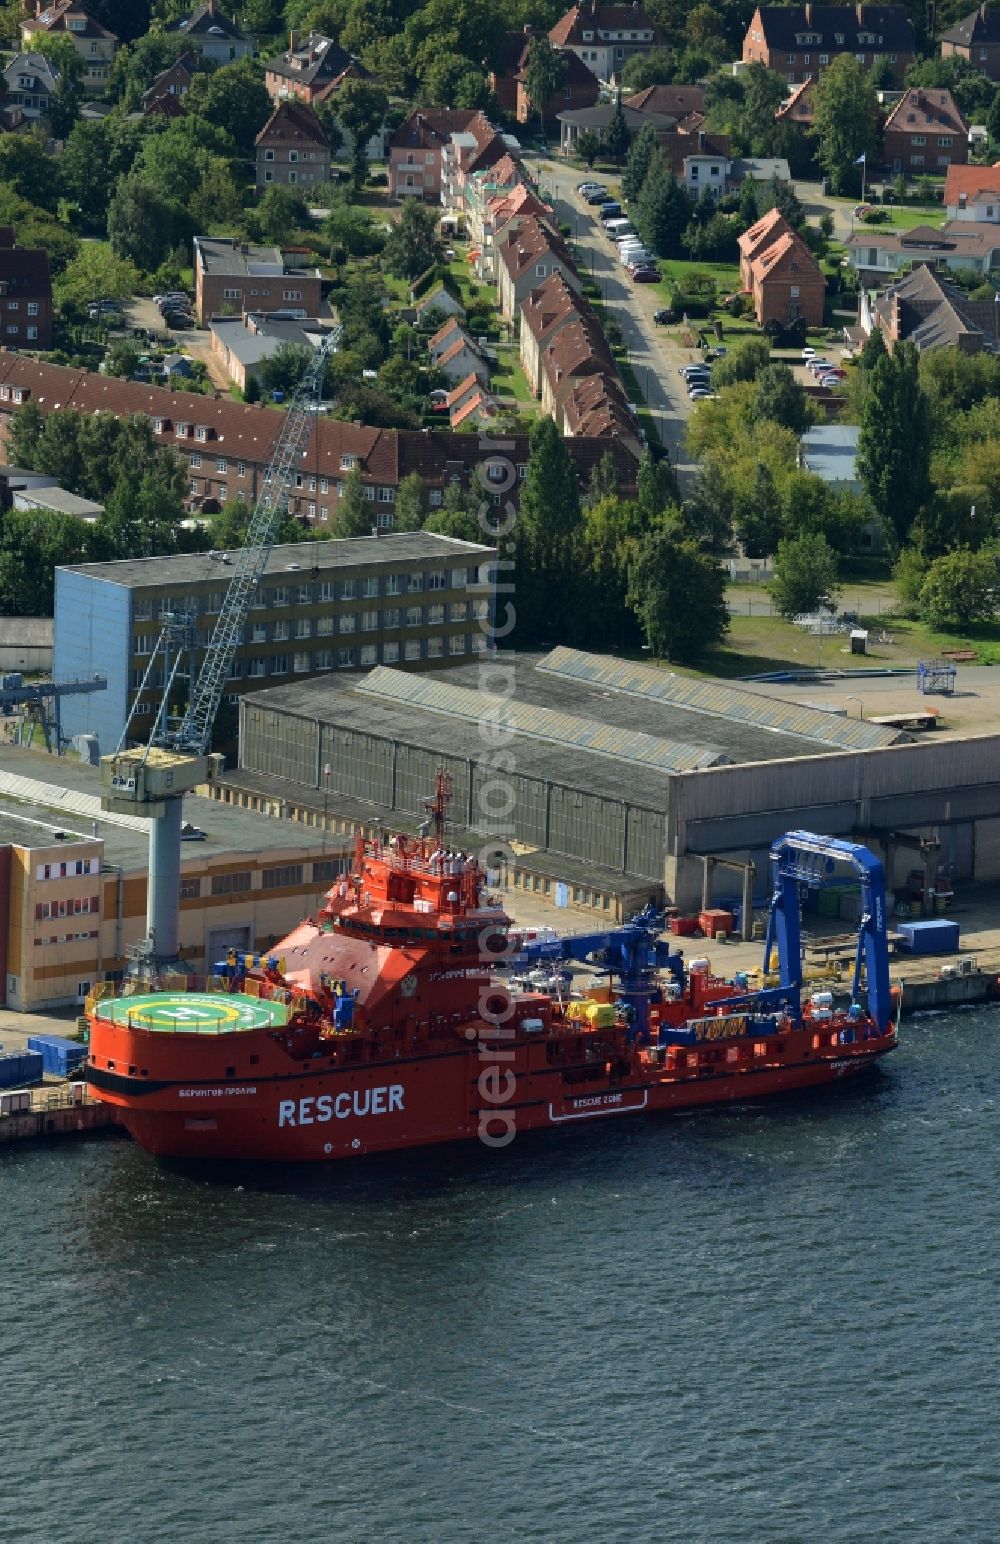 Aerial image Wismar - Ice breaking rescue ships in front of Nordic Yards in Wismar in the state of Mecklenburg - Western Pomerania. The distinct red ships - Multipurpose Rescue and Salvage Vessel (MPRSV) - were ordered by the Russian Ministry of Transportation